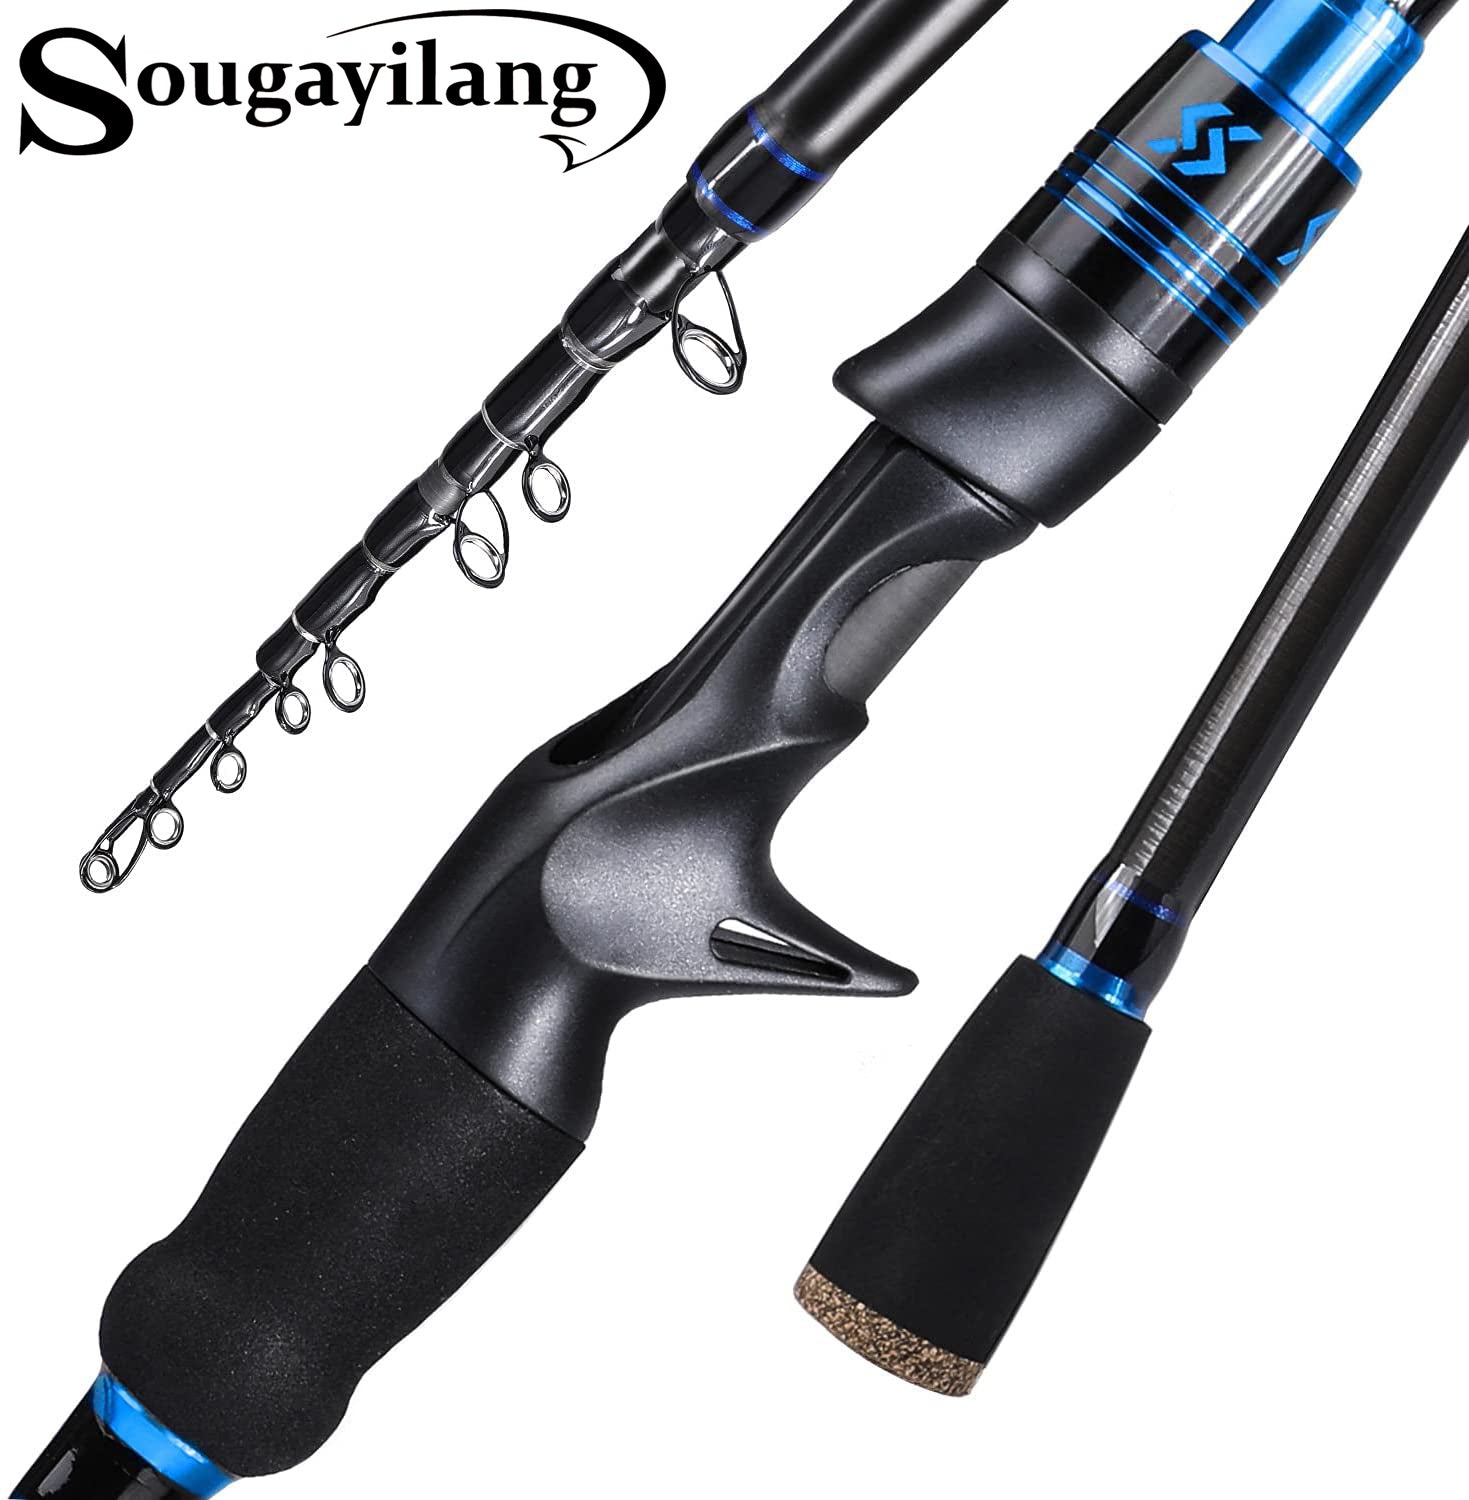  Sougayilang Slow Pitch Jigging Rod, 40 Ton Carbon Fiber Blank,  2-Piece Casting Rod for Snapper, Grouper and Tuna : Sports & Outdoors